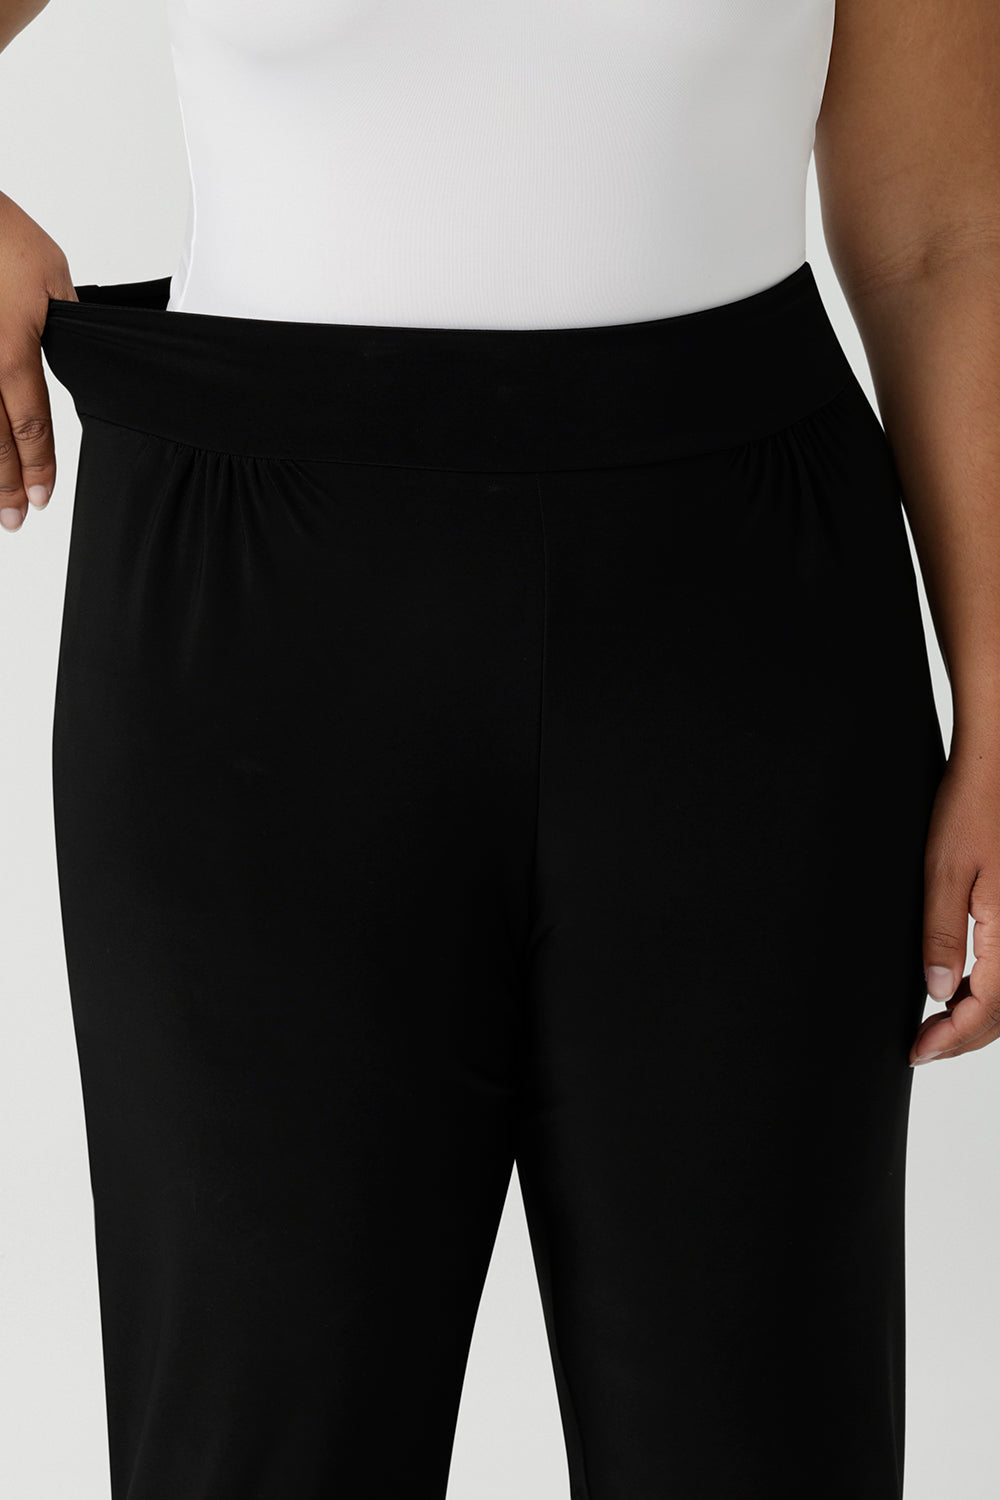 Close up of the stretchy waistband of great pants for travel, these dropped crotch, single seam black pants are made stretchy jersey for ultimate comfort. shop these comfy black pants for your travel and capsule wardrobe now!